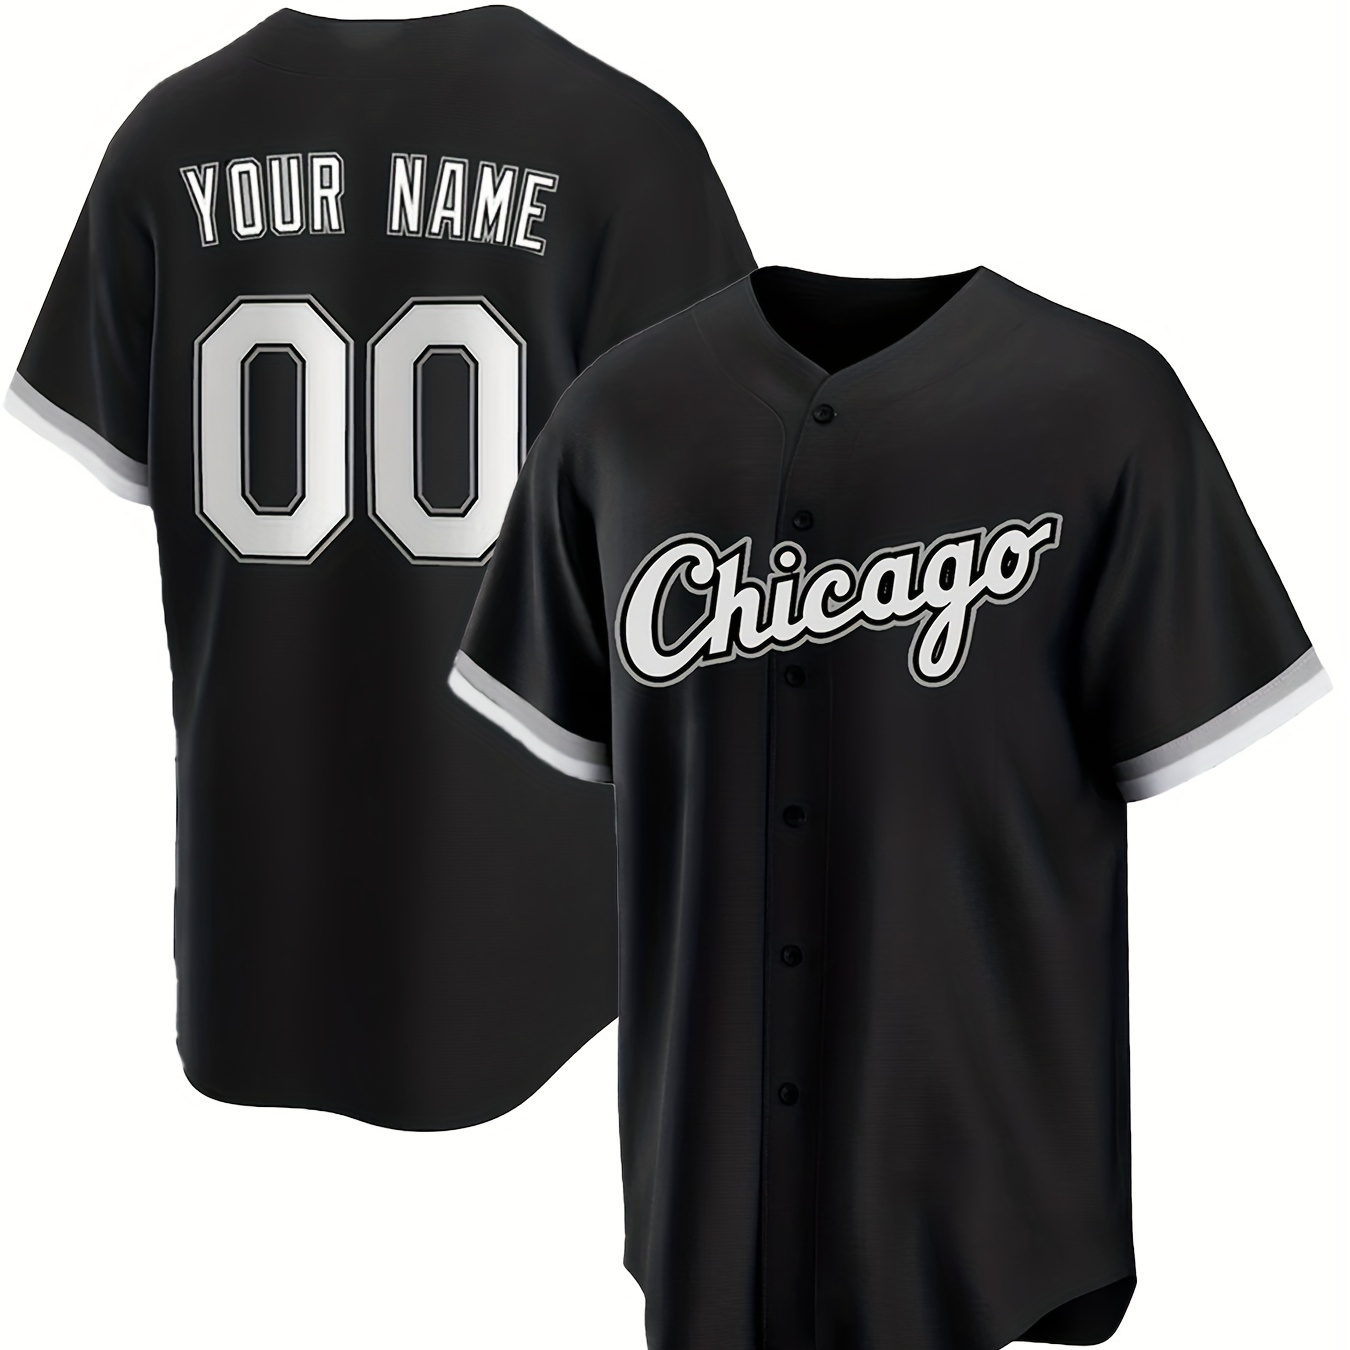 

Customized Name And Number Design, Men's Chicago Short Sleeve Loose Breathable V-neck Embroidery Baseball Jersey, Sports Shirt For Team Training